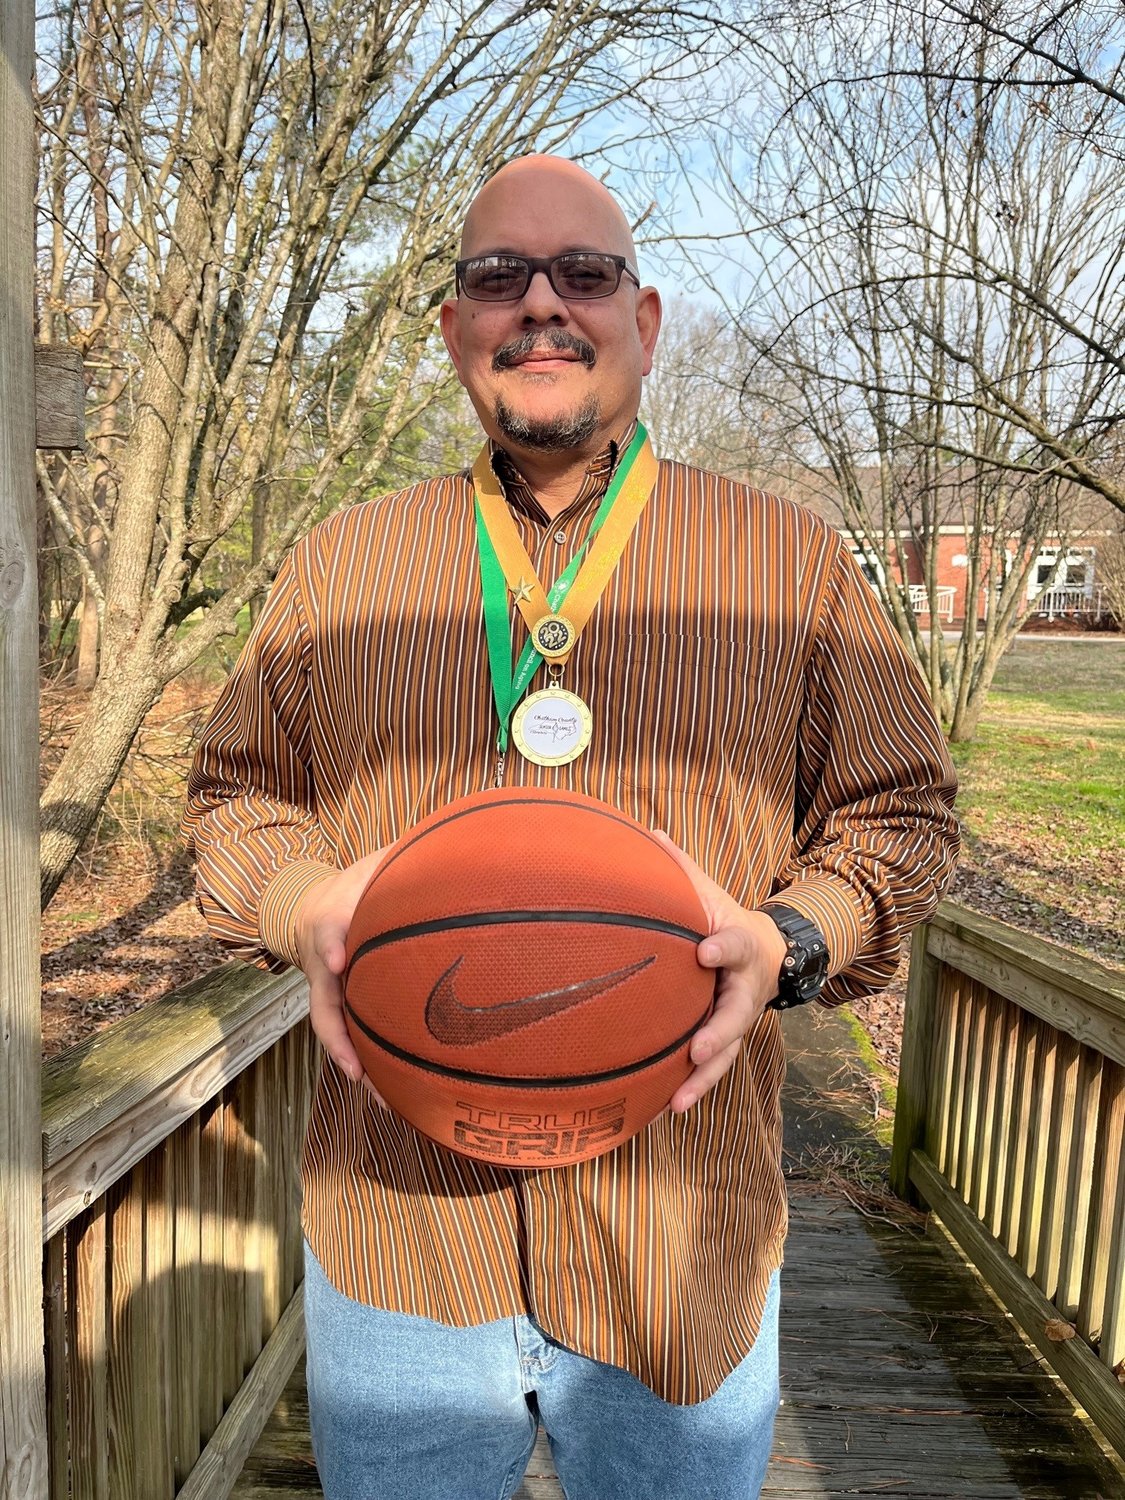 Rodney Dietrich, Integrated Services Specialist and Aging Social Worker at the Chatham County Council on Aging, has used basketball to connect with both ends of the generational spectrum.